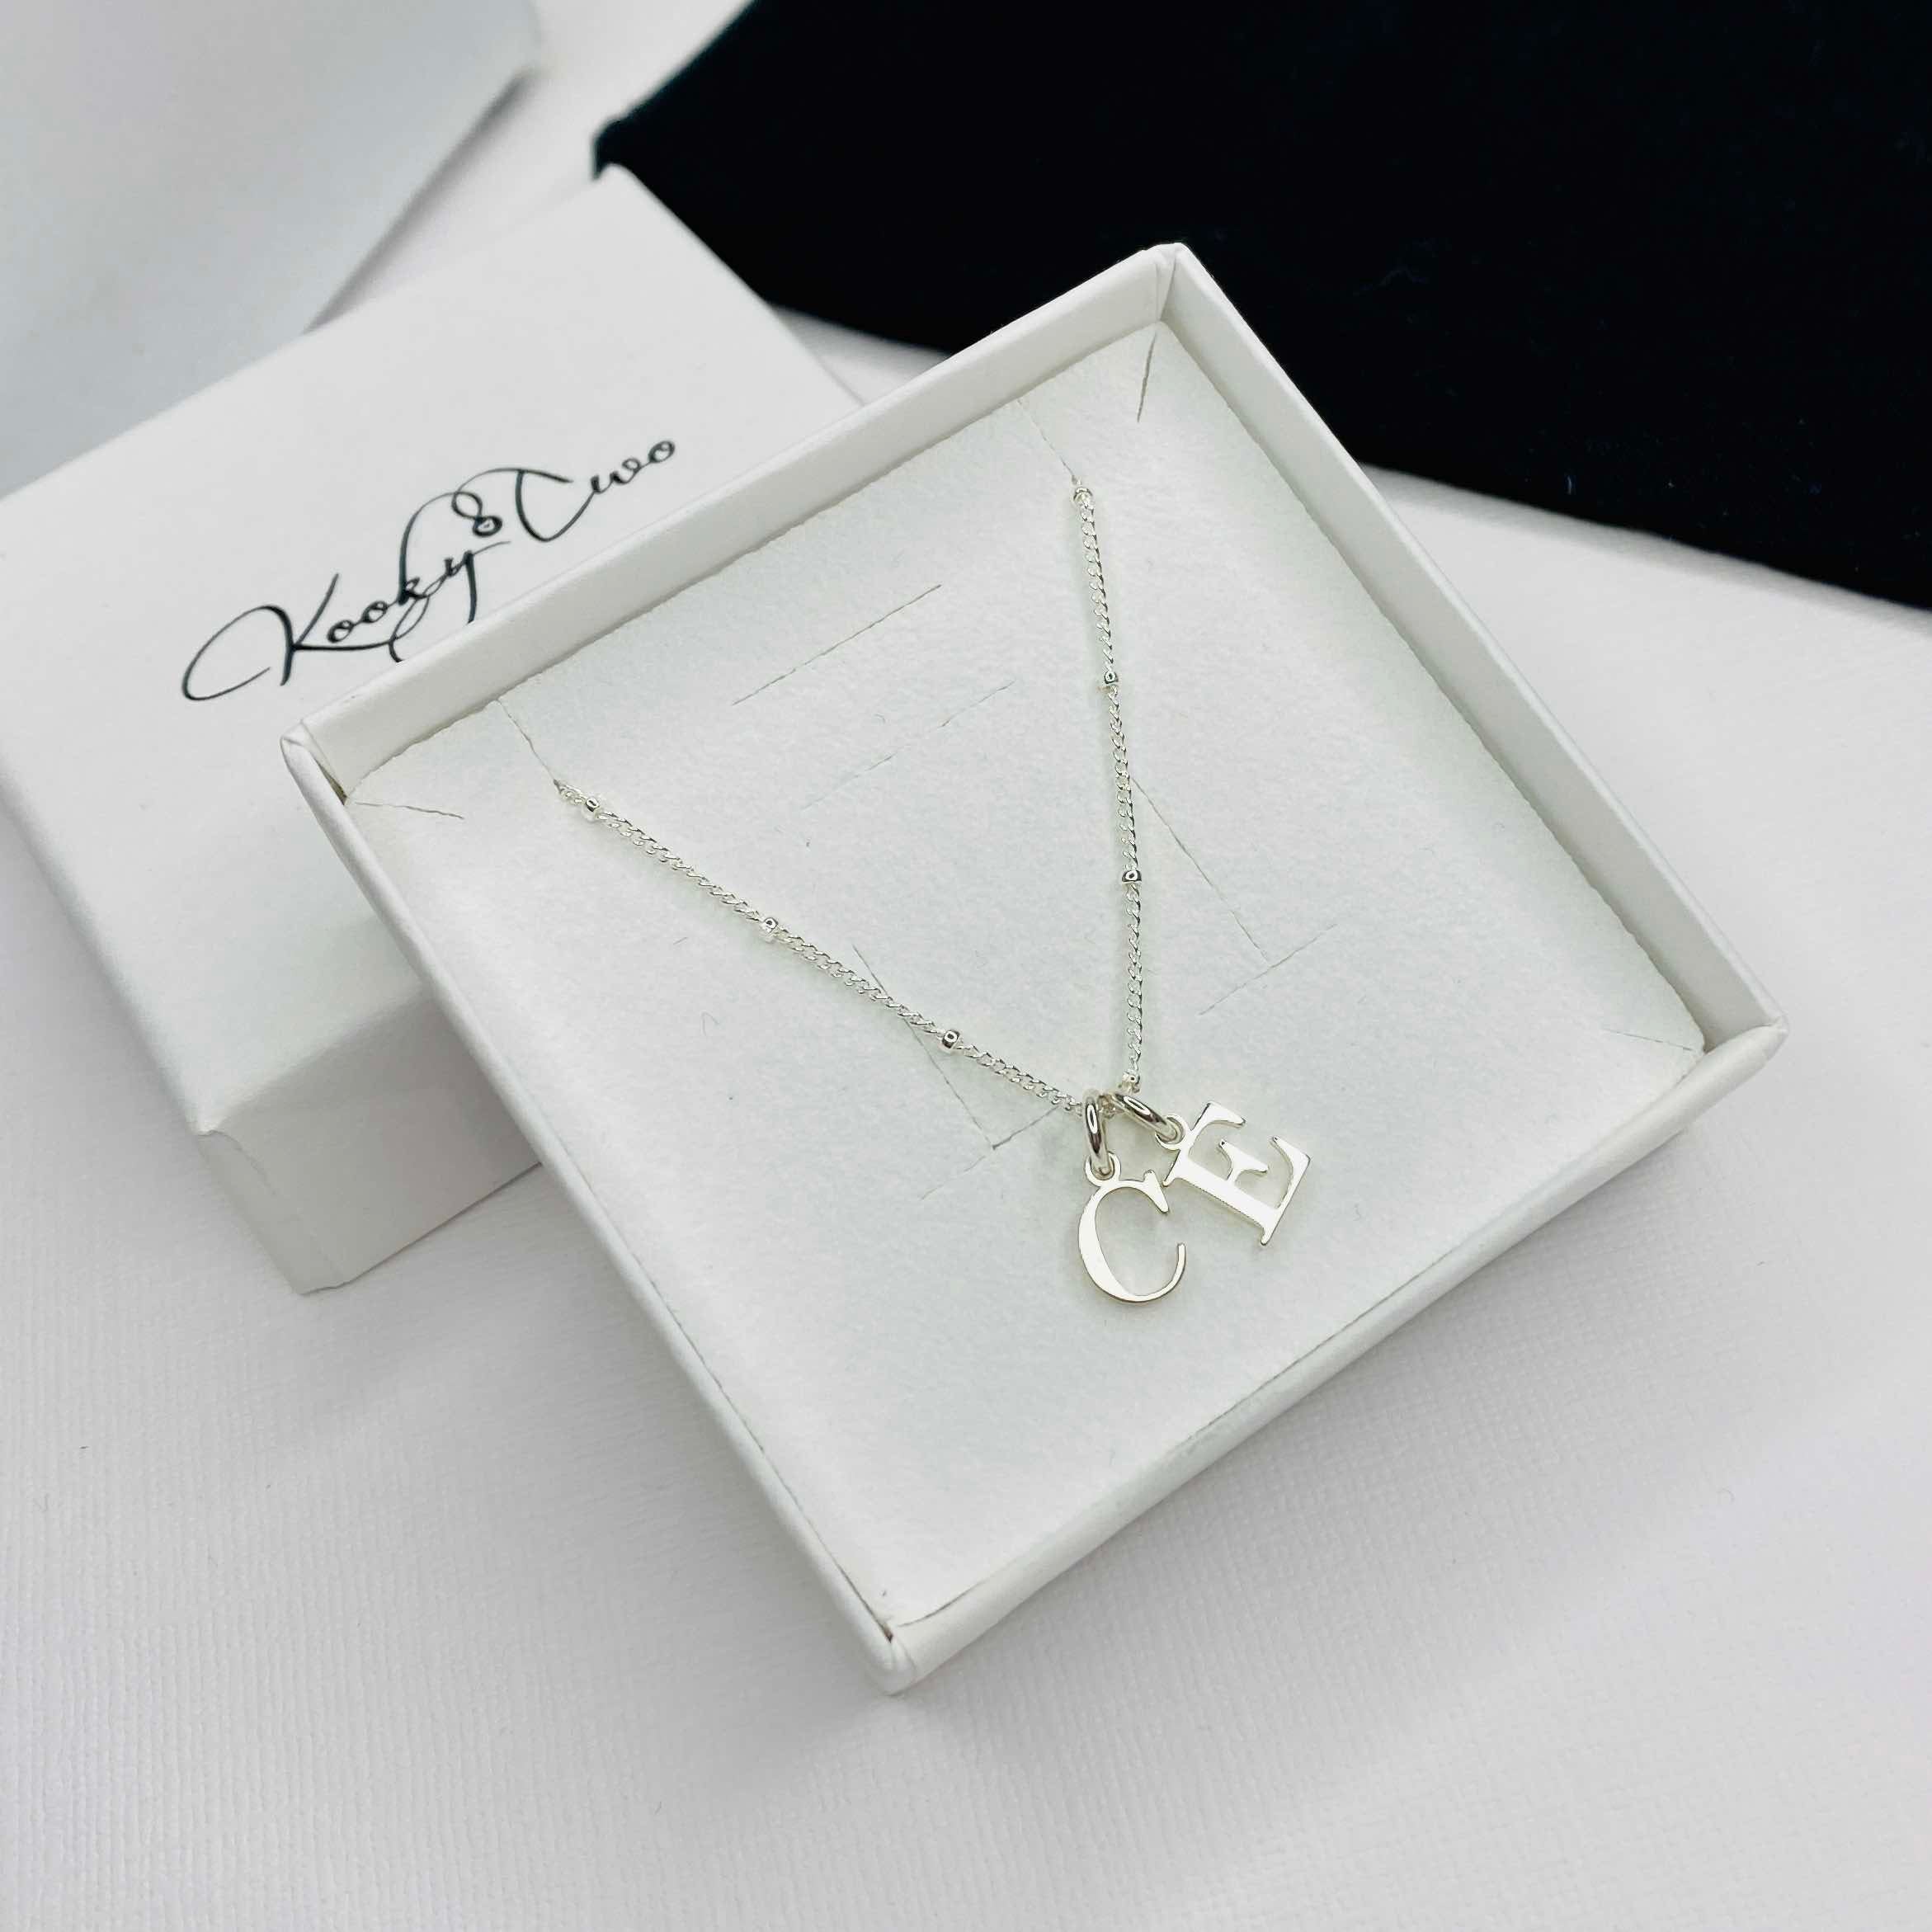 Big Initial Necklace in 925 Sterling Silver | JOYAMO - Personalized Jewelry